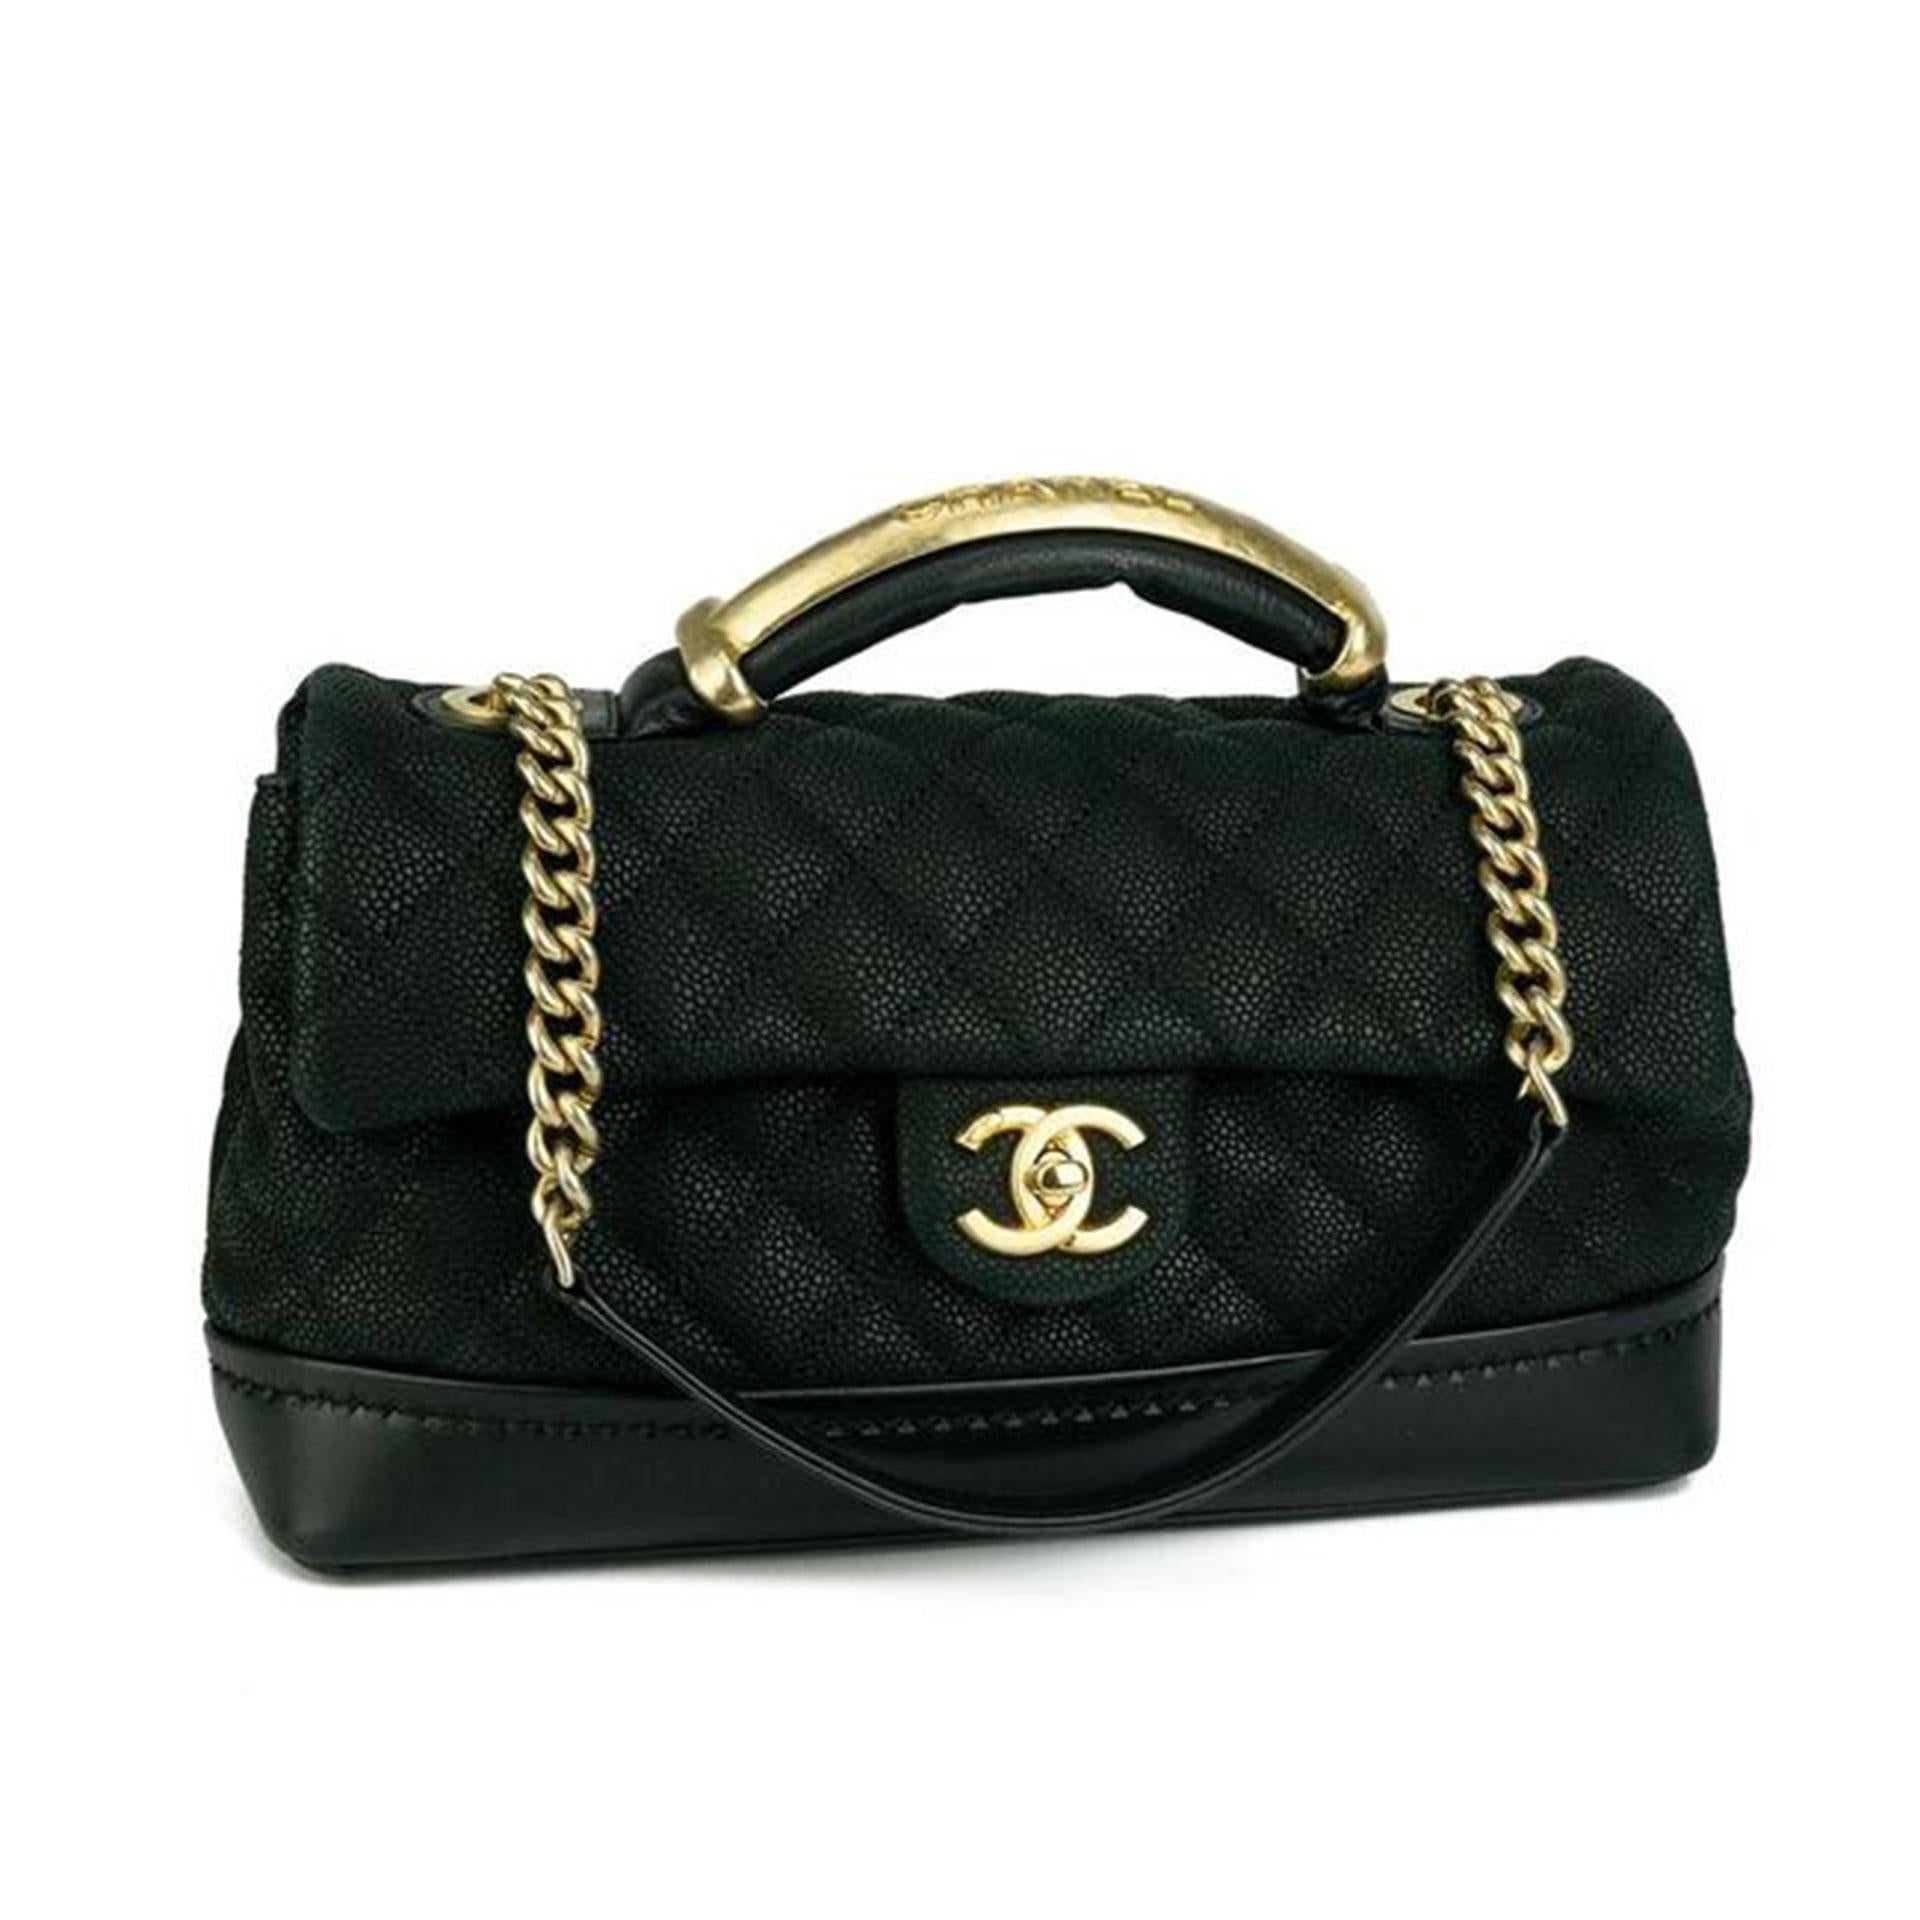 Chanel 2013 Cruise Iridescent Caviar Kelly Top Handle Crossbody Classic Flap Bag For Sale 3